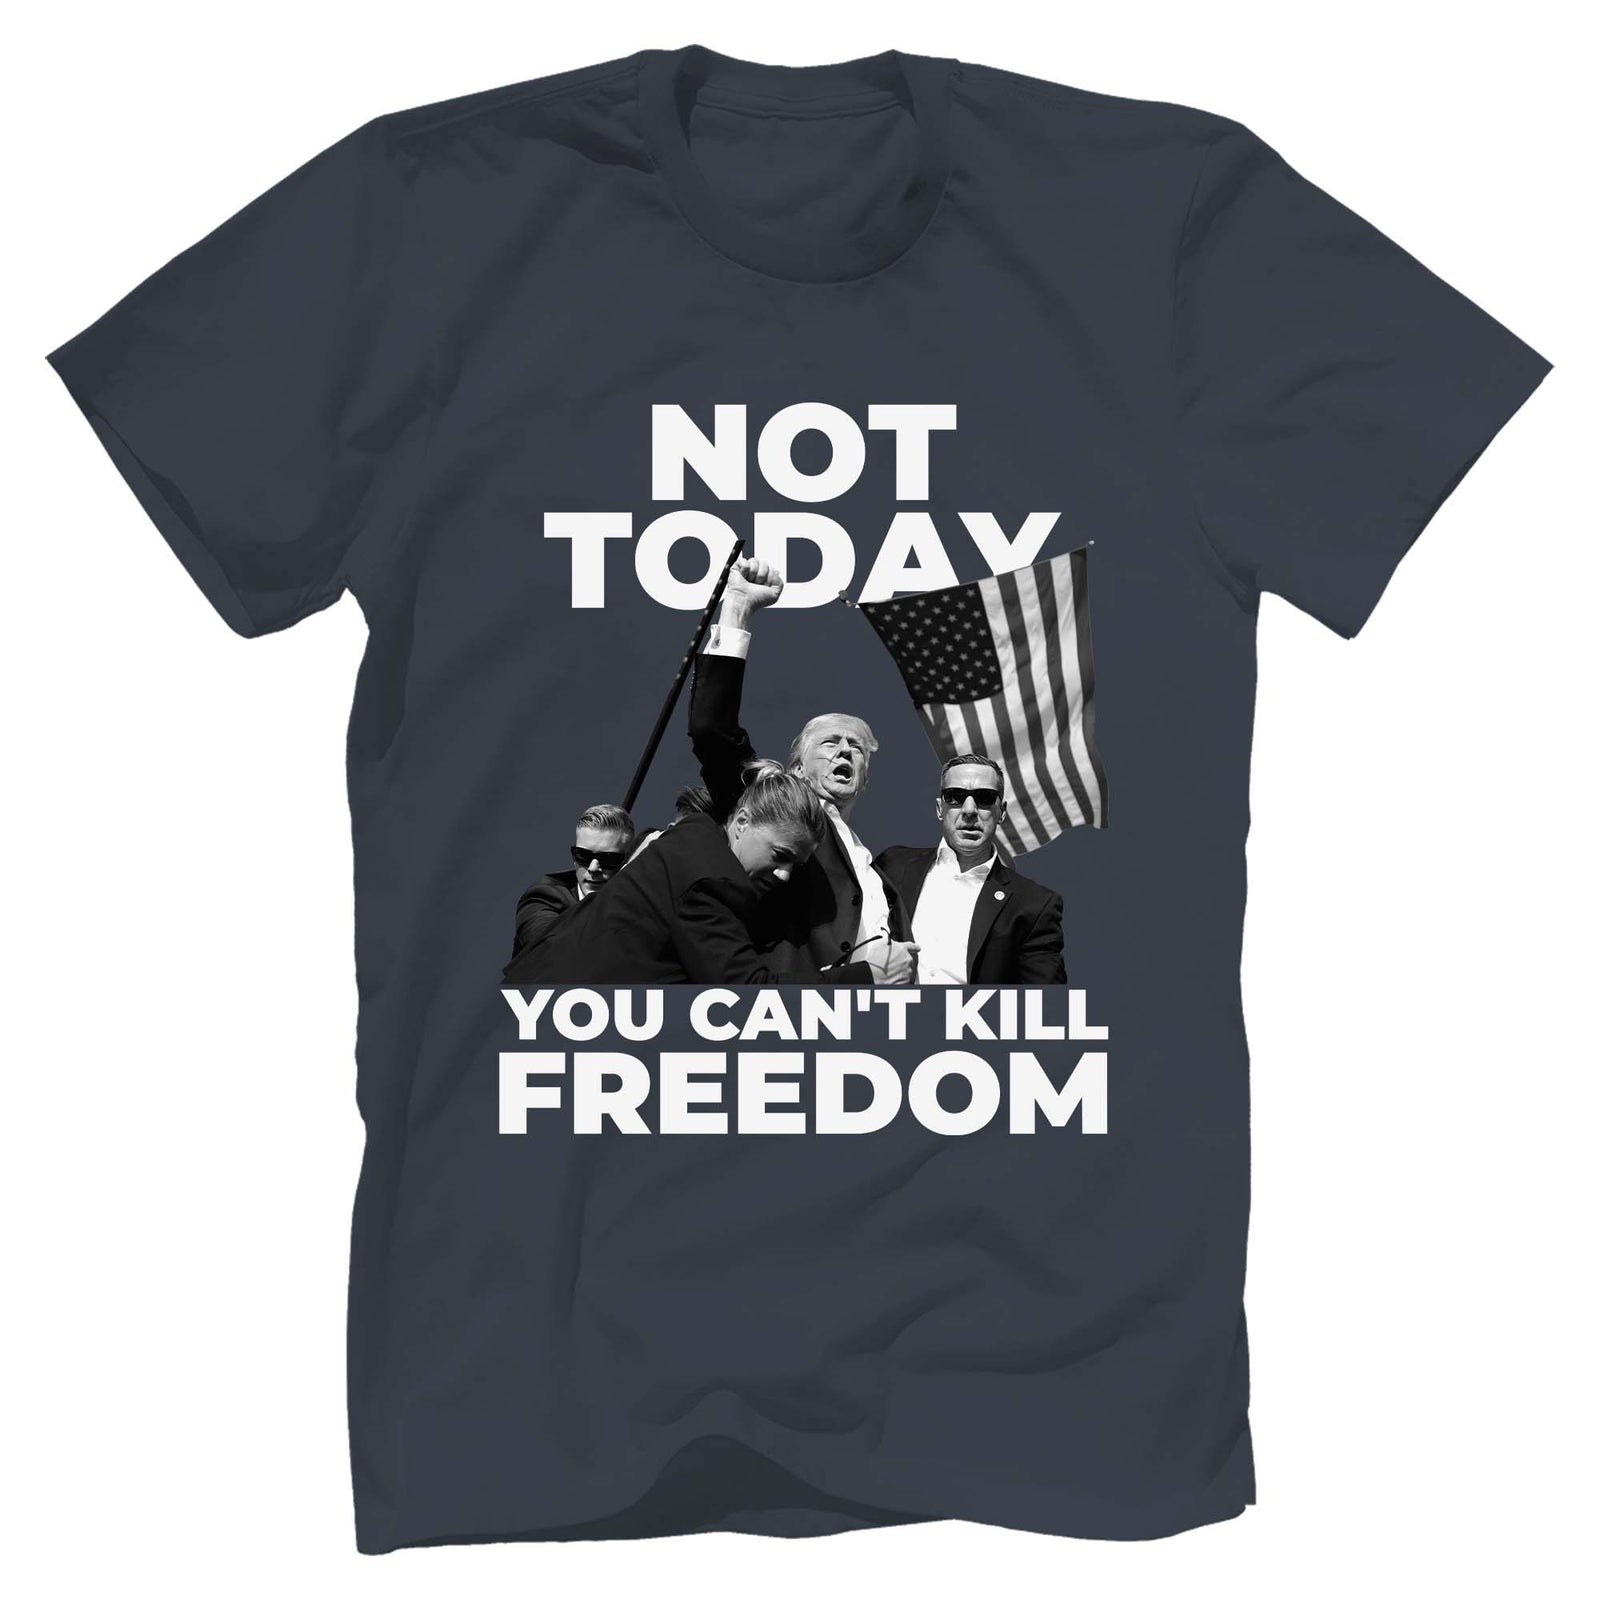 Not Today, Trump Fight, US Election T-Shirt - GB98